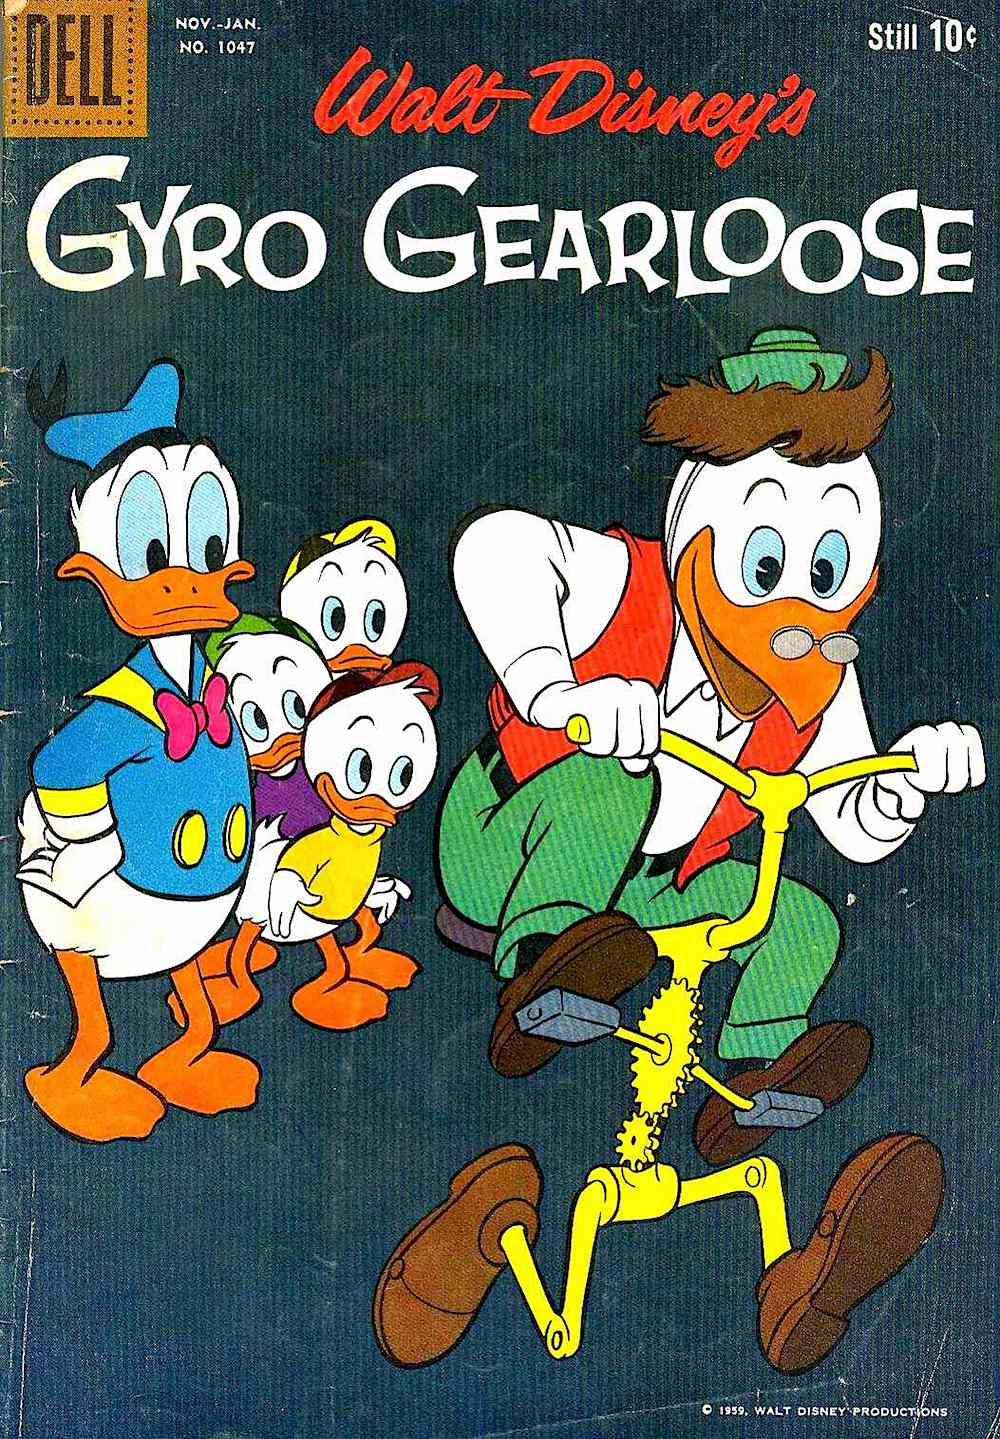 "Gyro Gearloose"   by Dell Comics, 1047